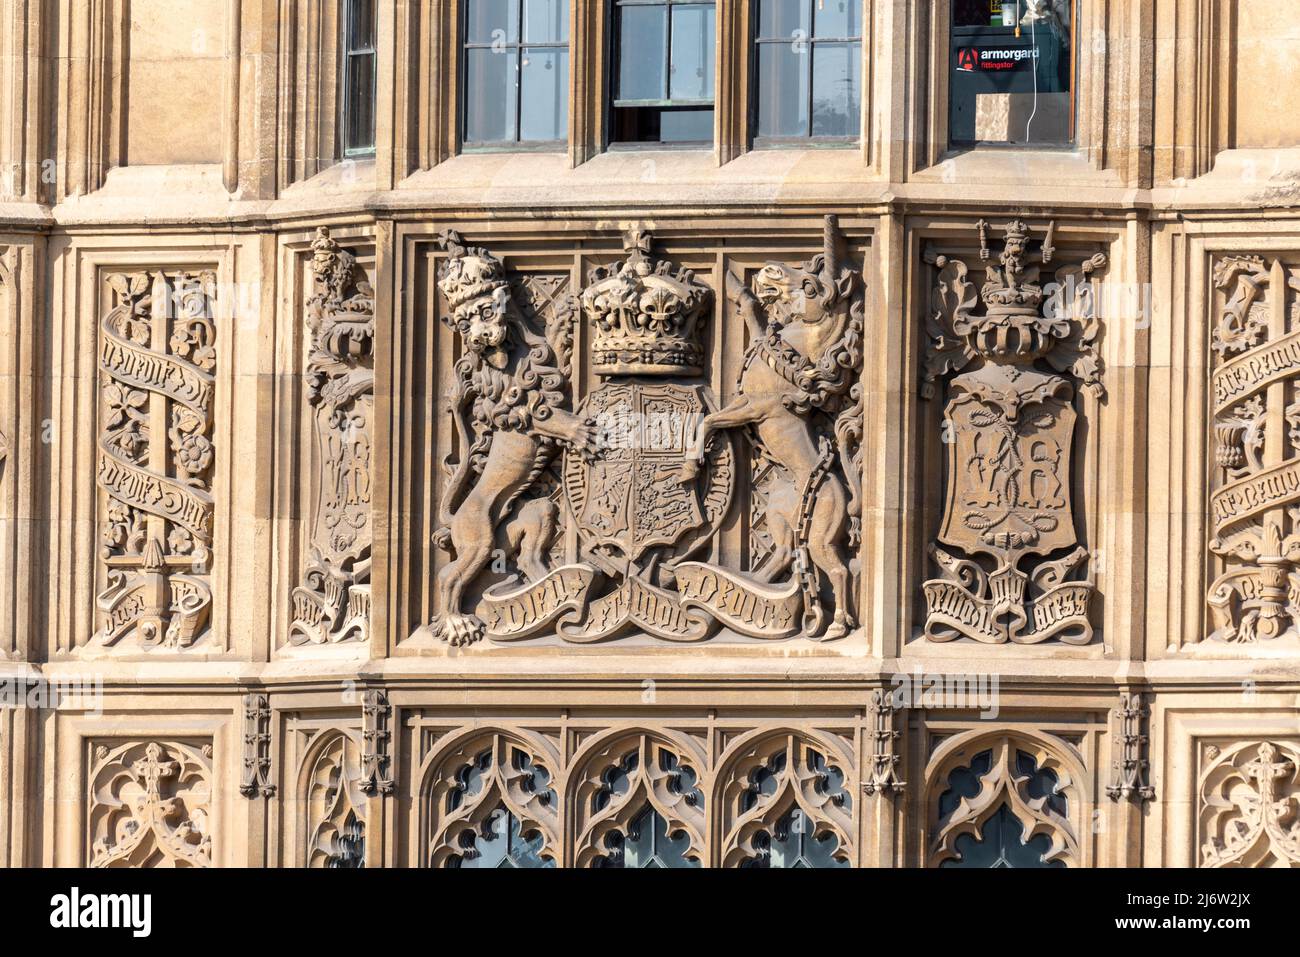 Dieu et mon droit motto and coat of arms of the United Kingdom on the Palace of Westminster, Houses of Parliament. Architecture, Victoria Regina, VR Stock Photo